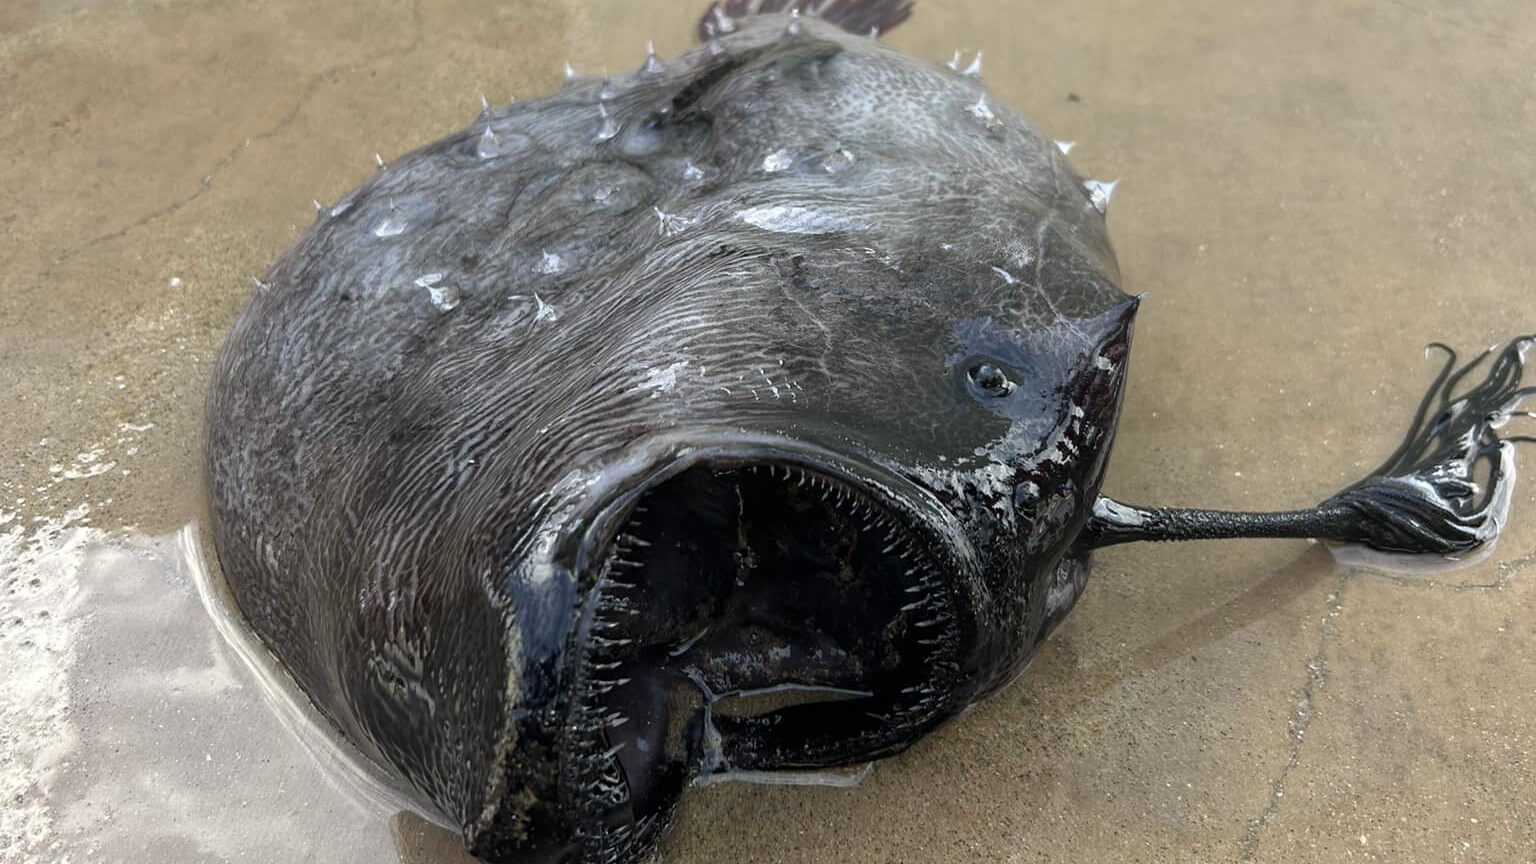 Female anglerfish possess a bioluminescent lure on their heads to attract prey. 